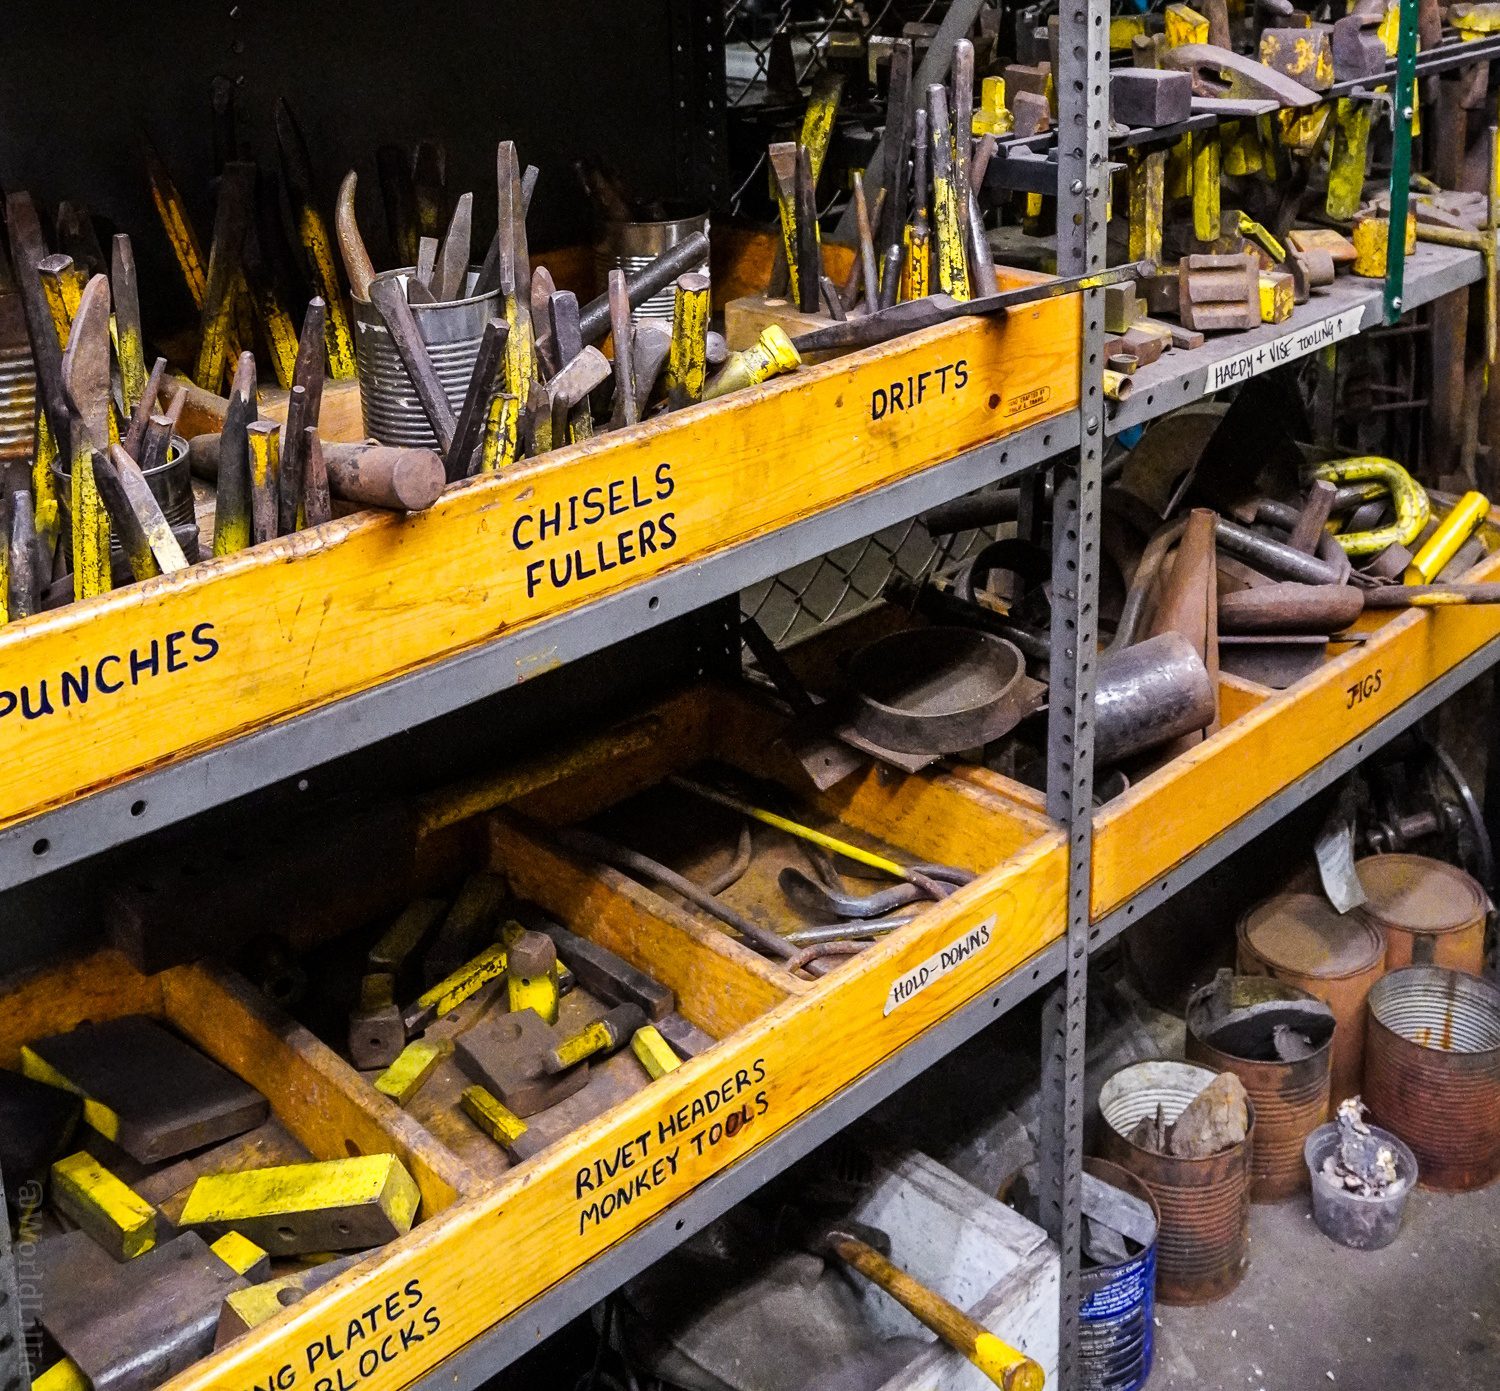 Chisels, fullers, and other tools.